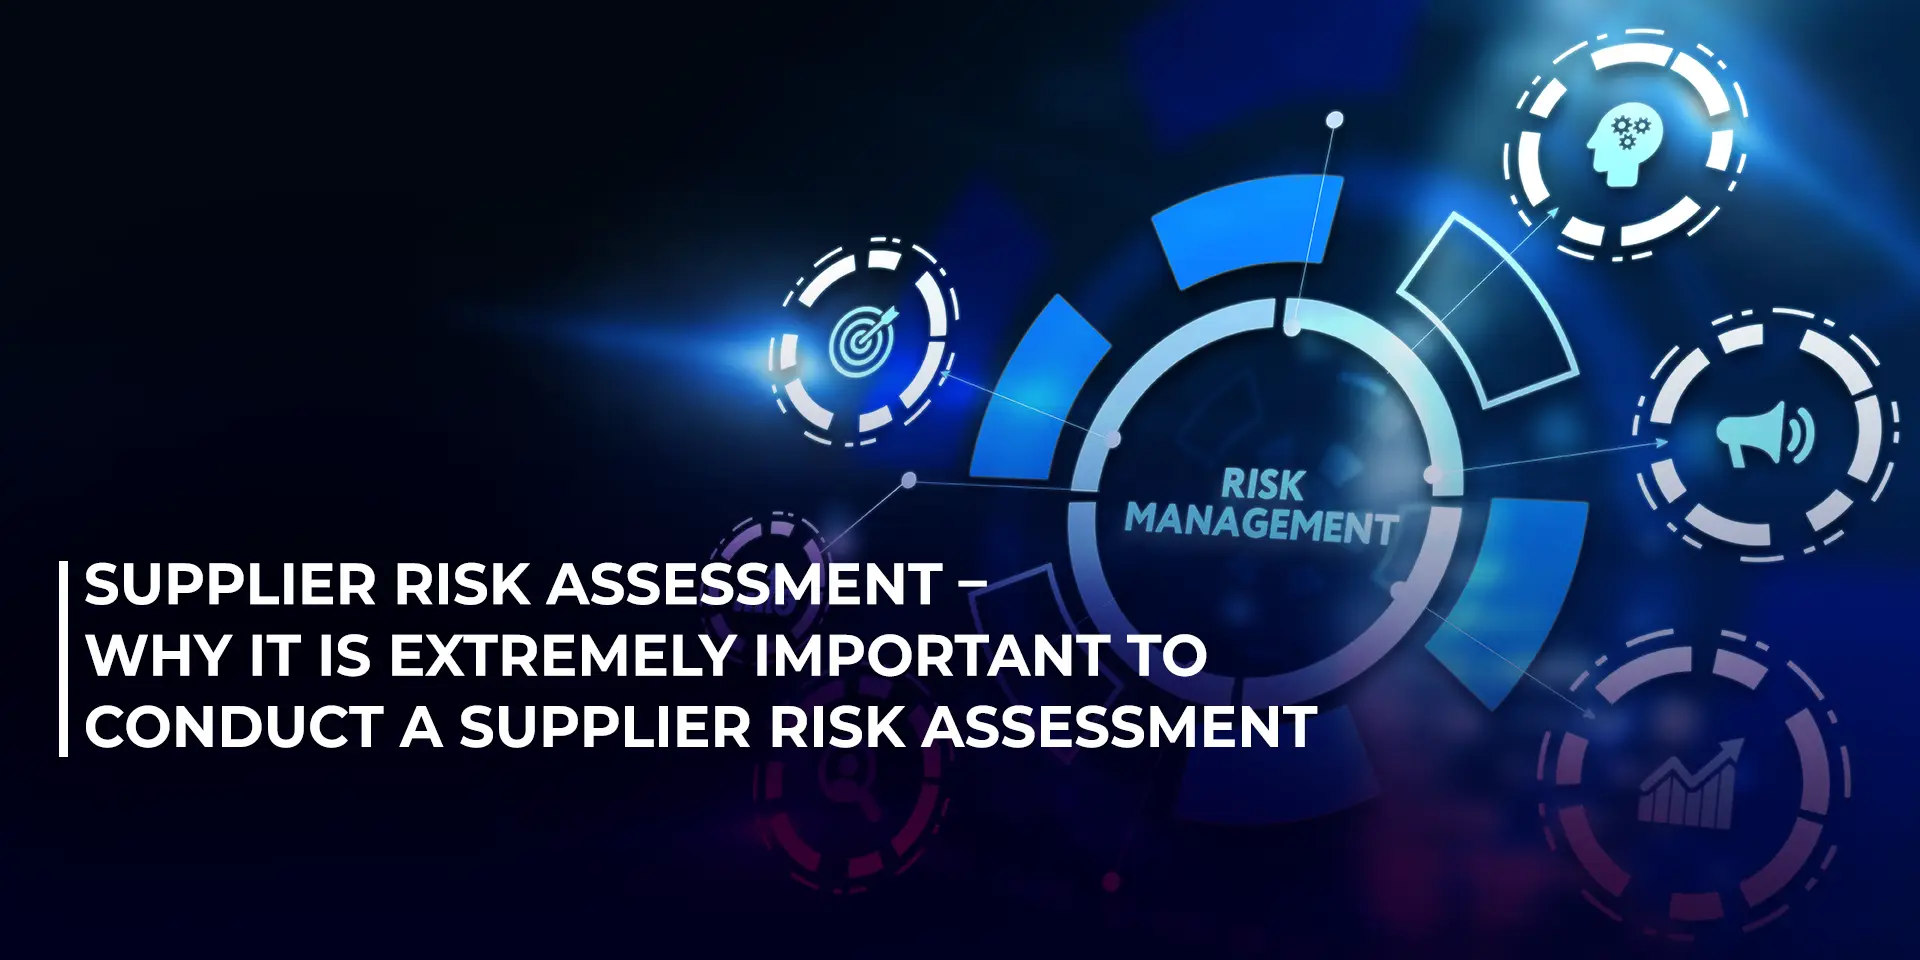 Supplier Risk Assessment – Why it is extremely important to conduct a supplier risk assessment